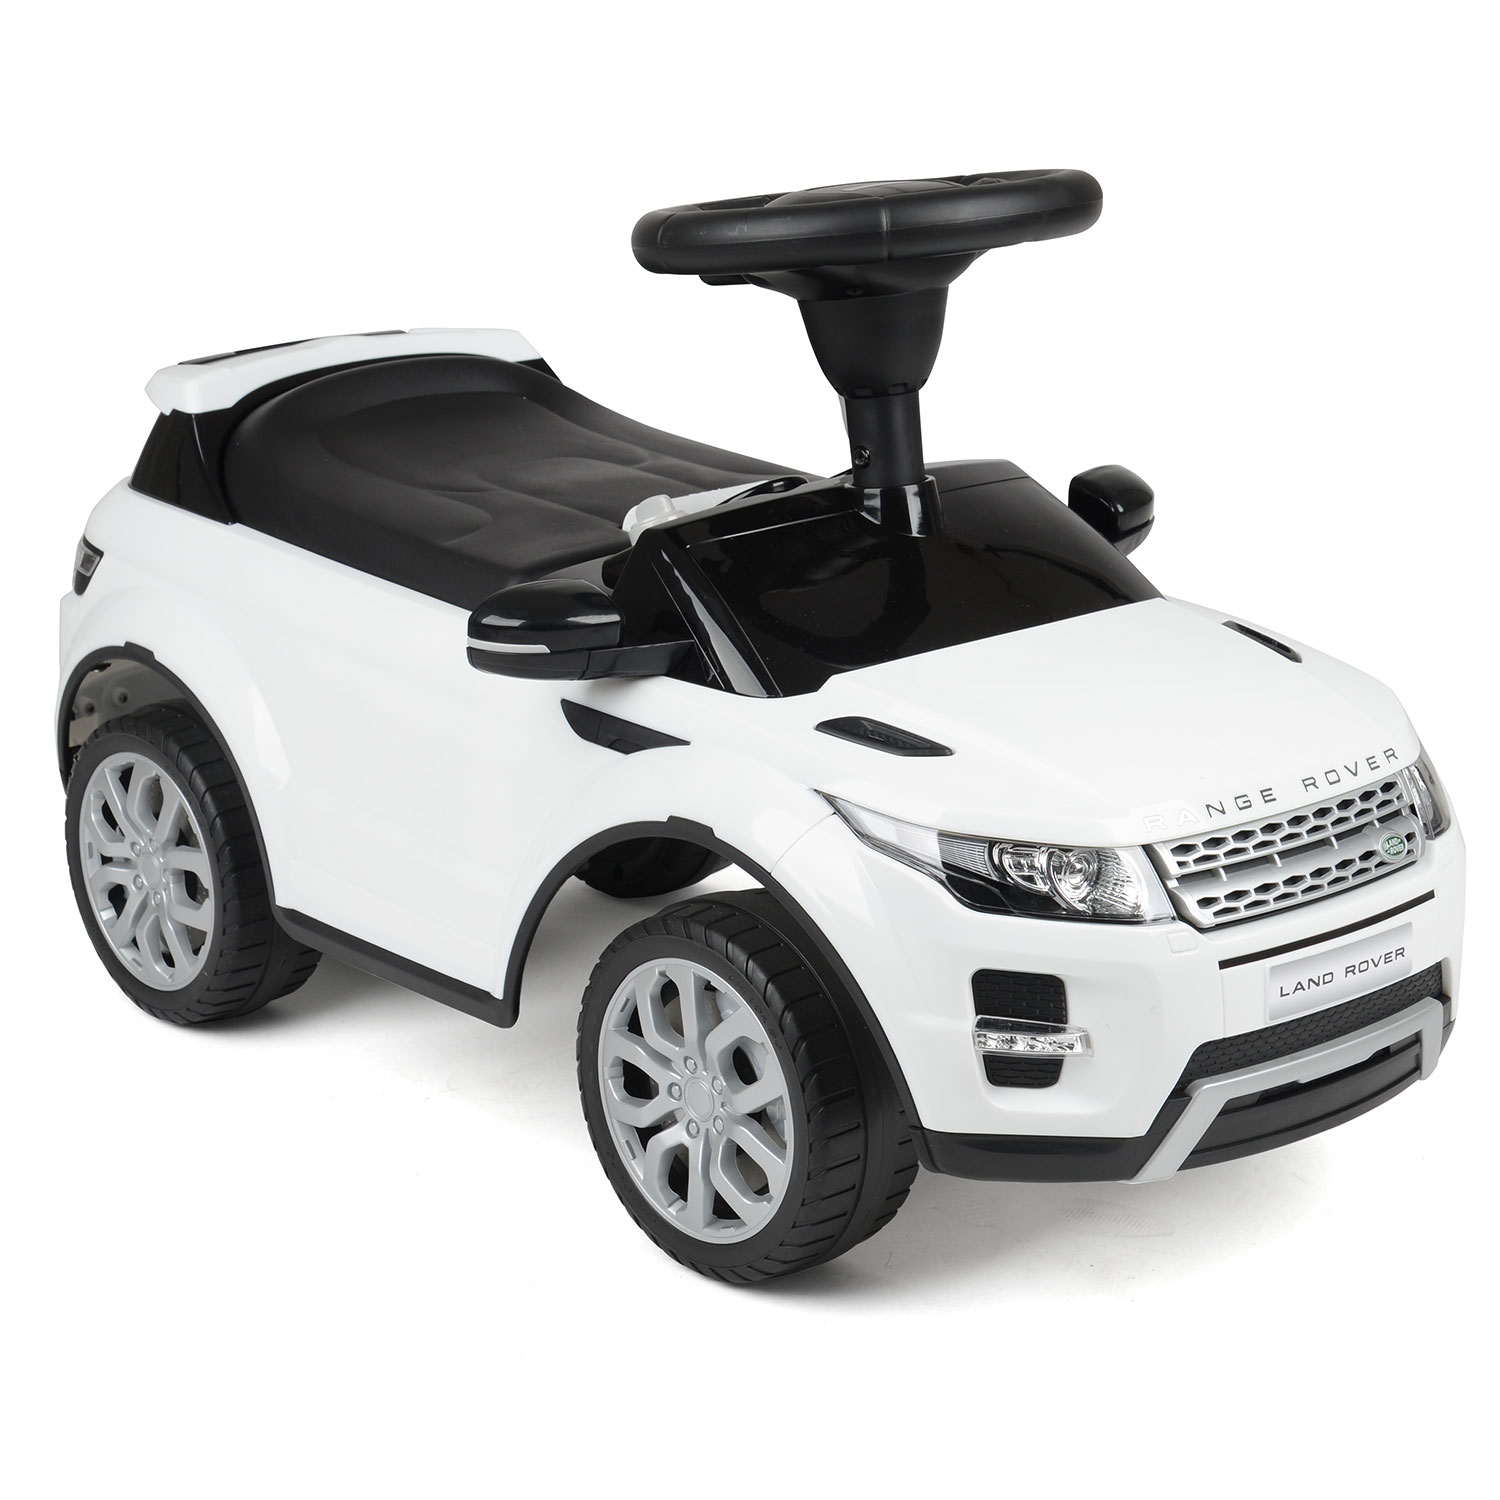 Children Toddlers Kids Ride on SUV Car Toy Range Rover Evoque With ...